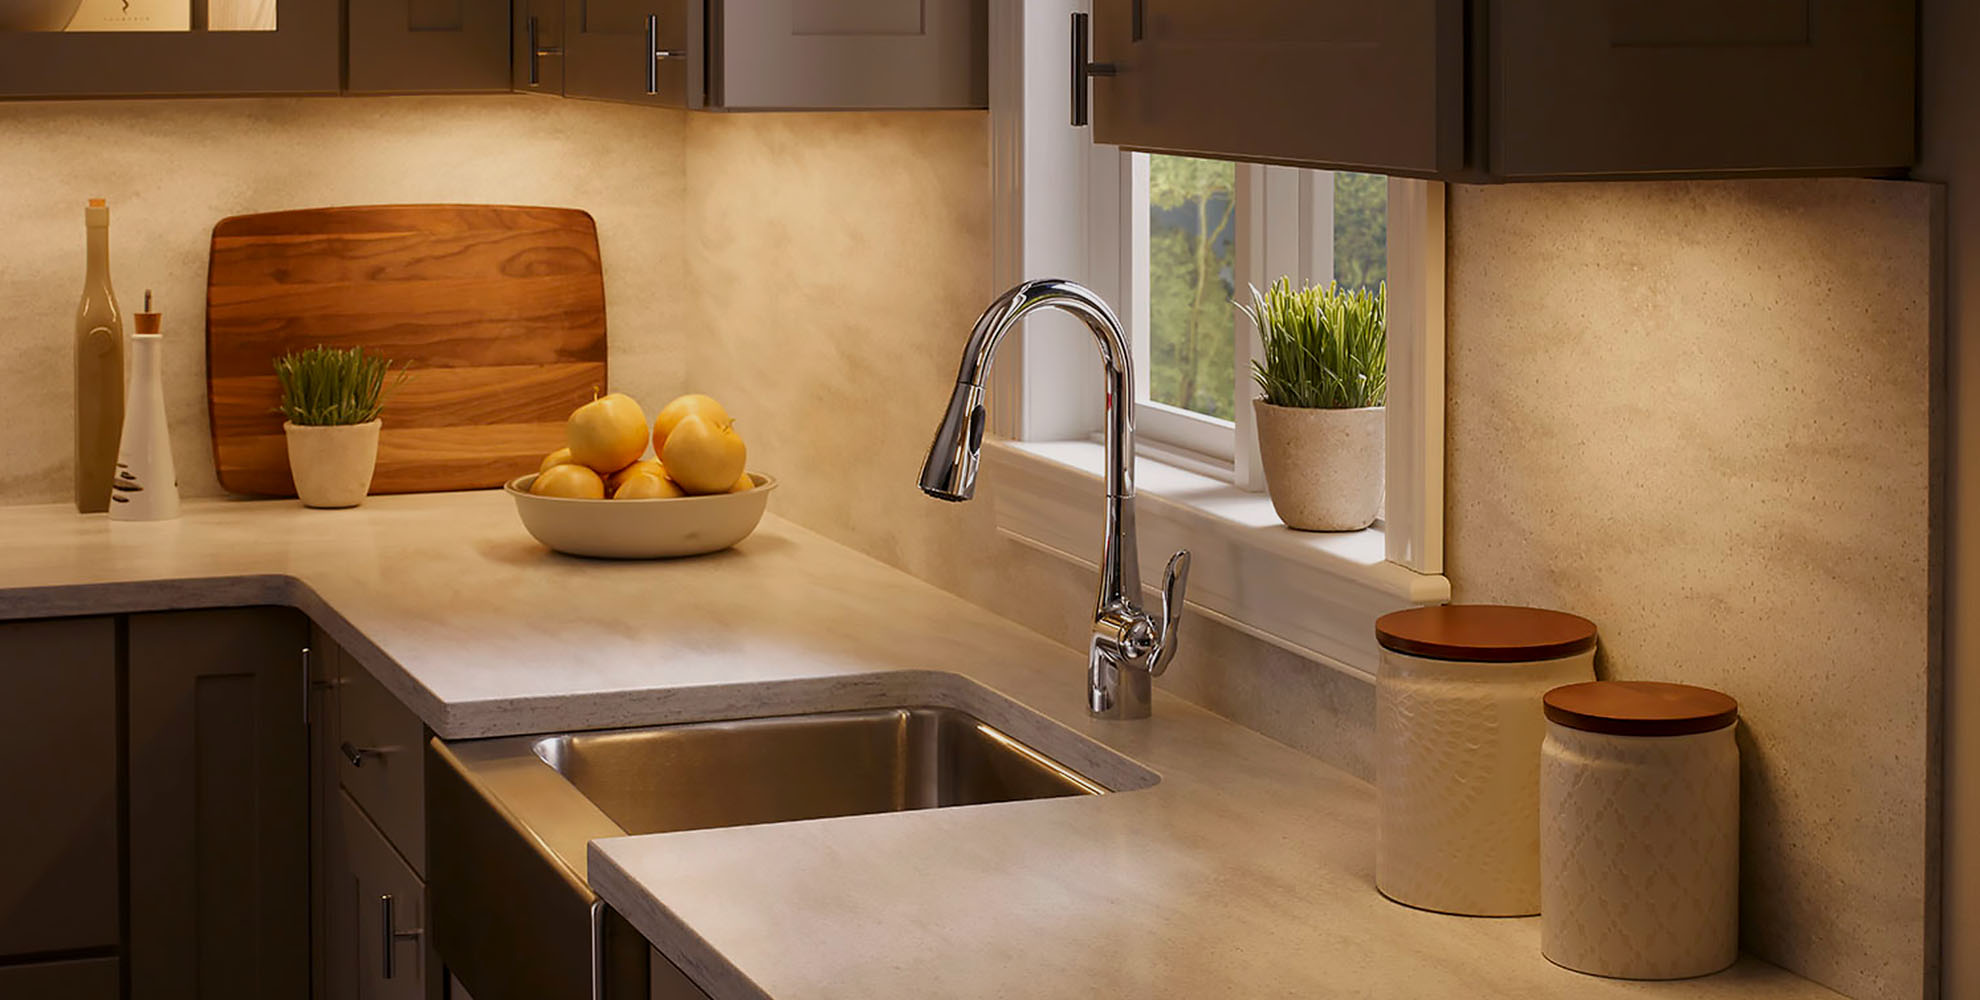 How To Choose Under Cabinet Lighting, What Under Cabinet Lighting Is Best